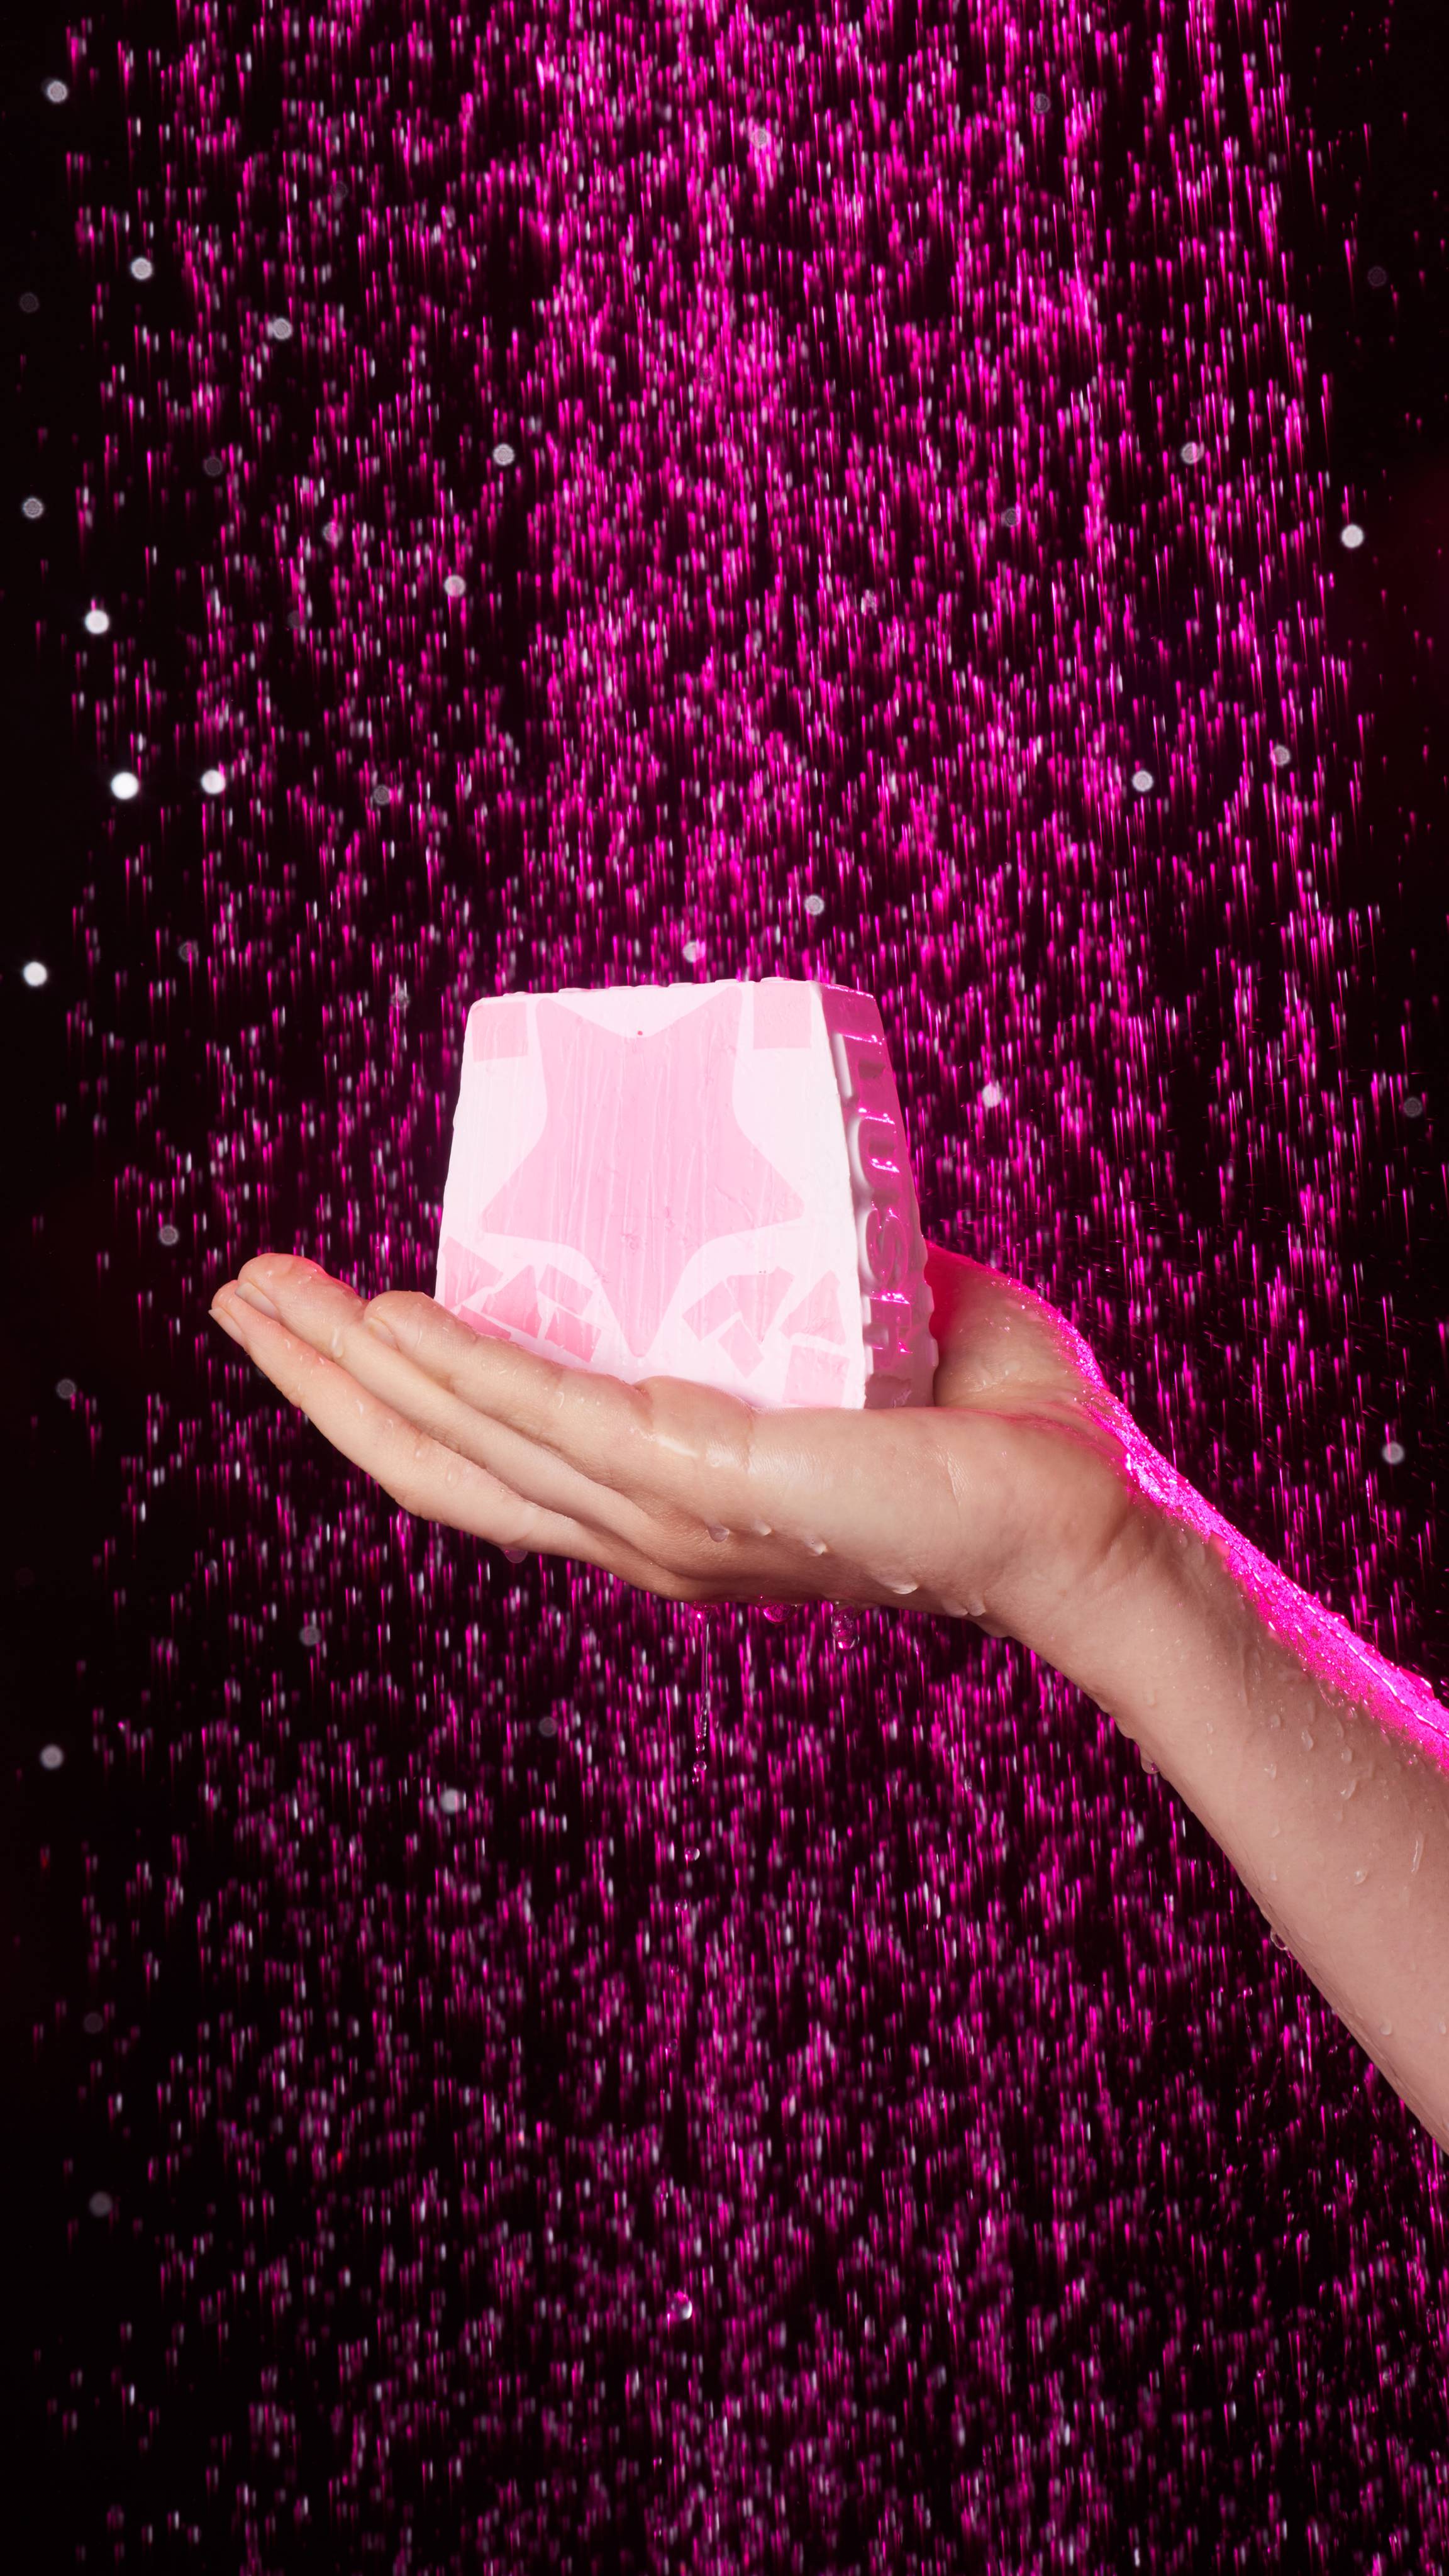 A close-up of a single hand holding the Snow Fairy soap as shower water falls, tinted by pink lighting.